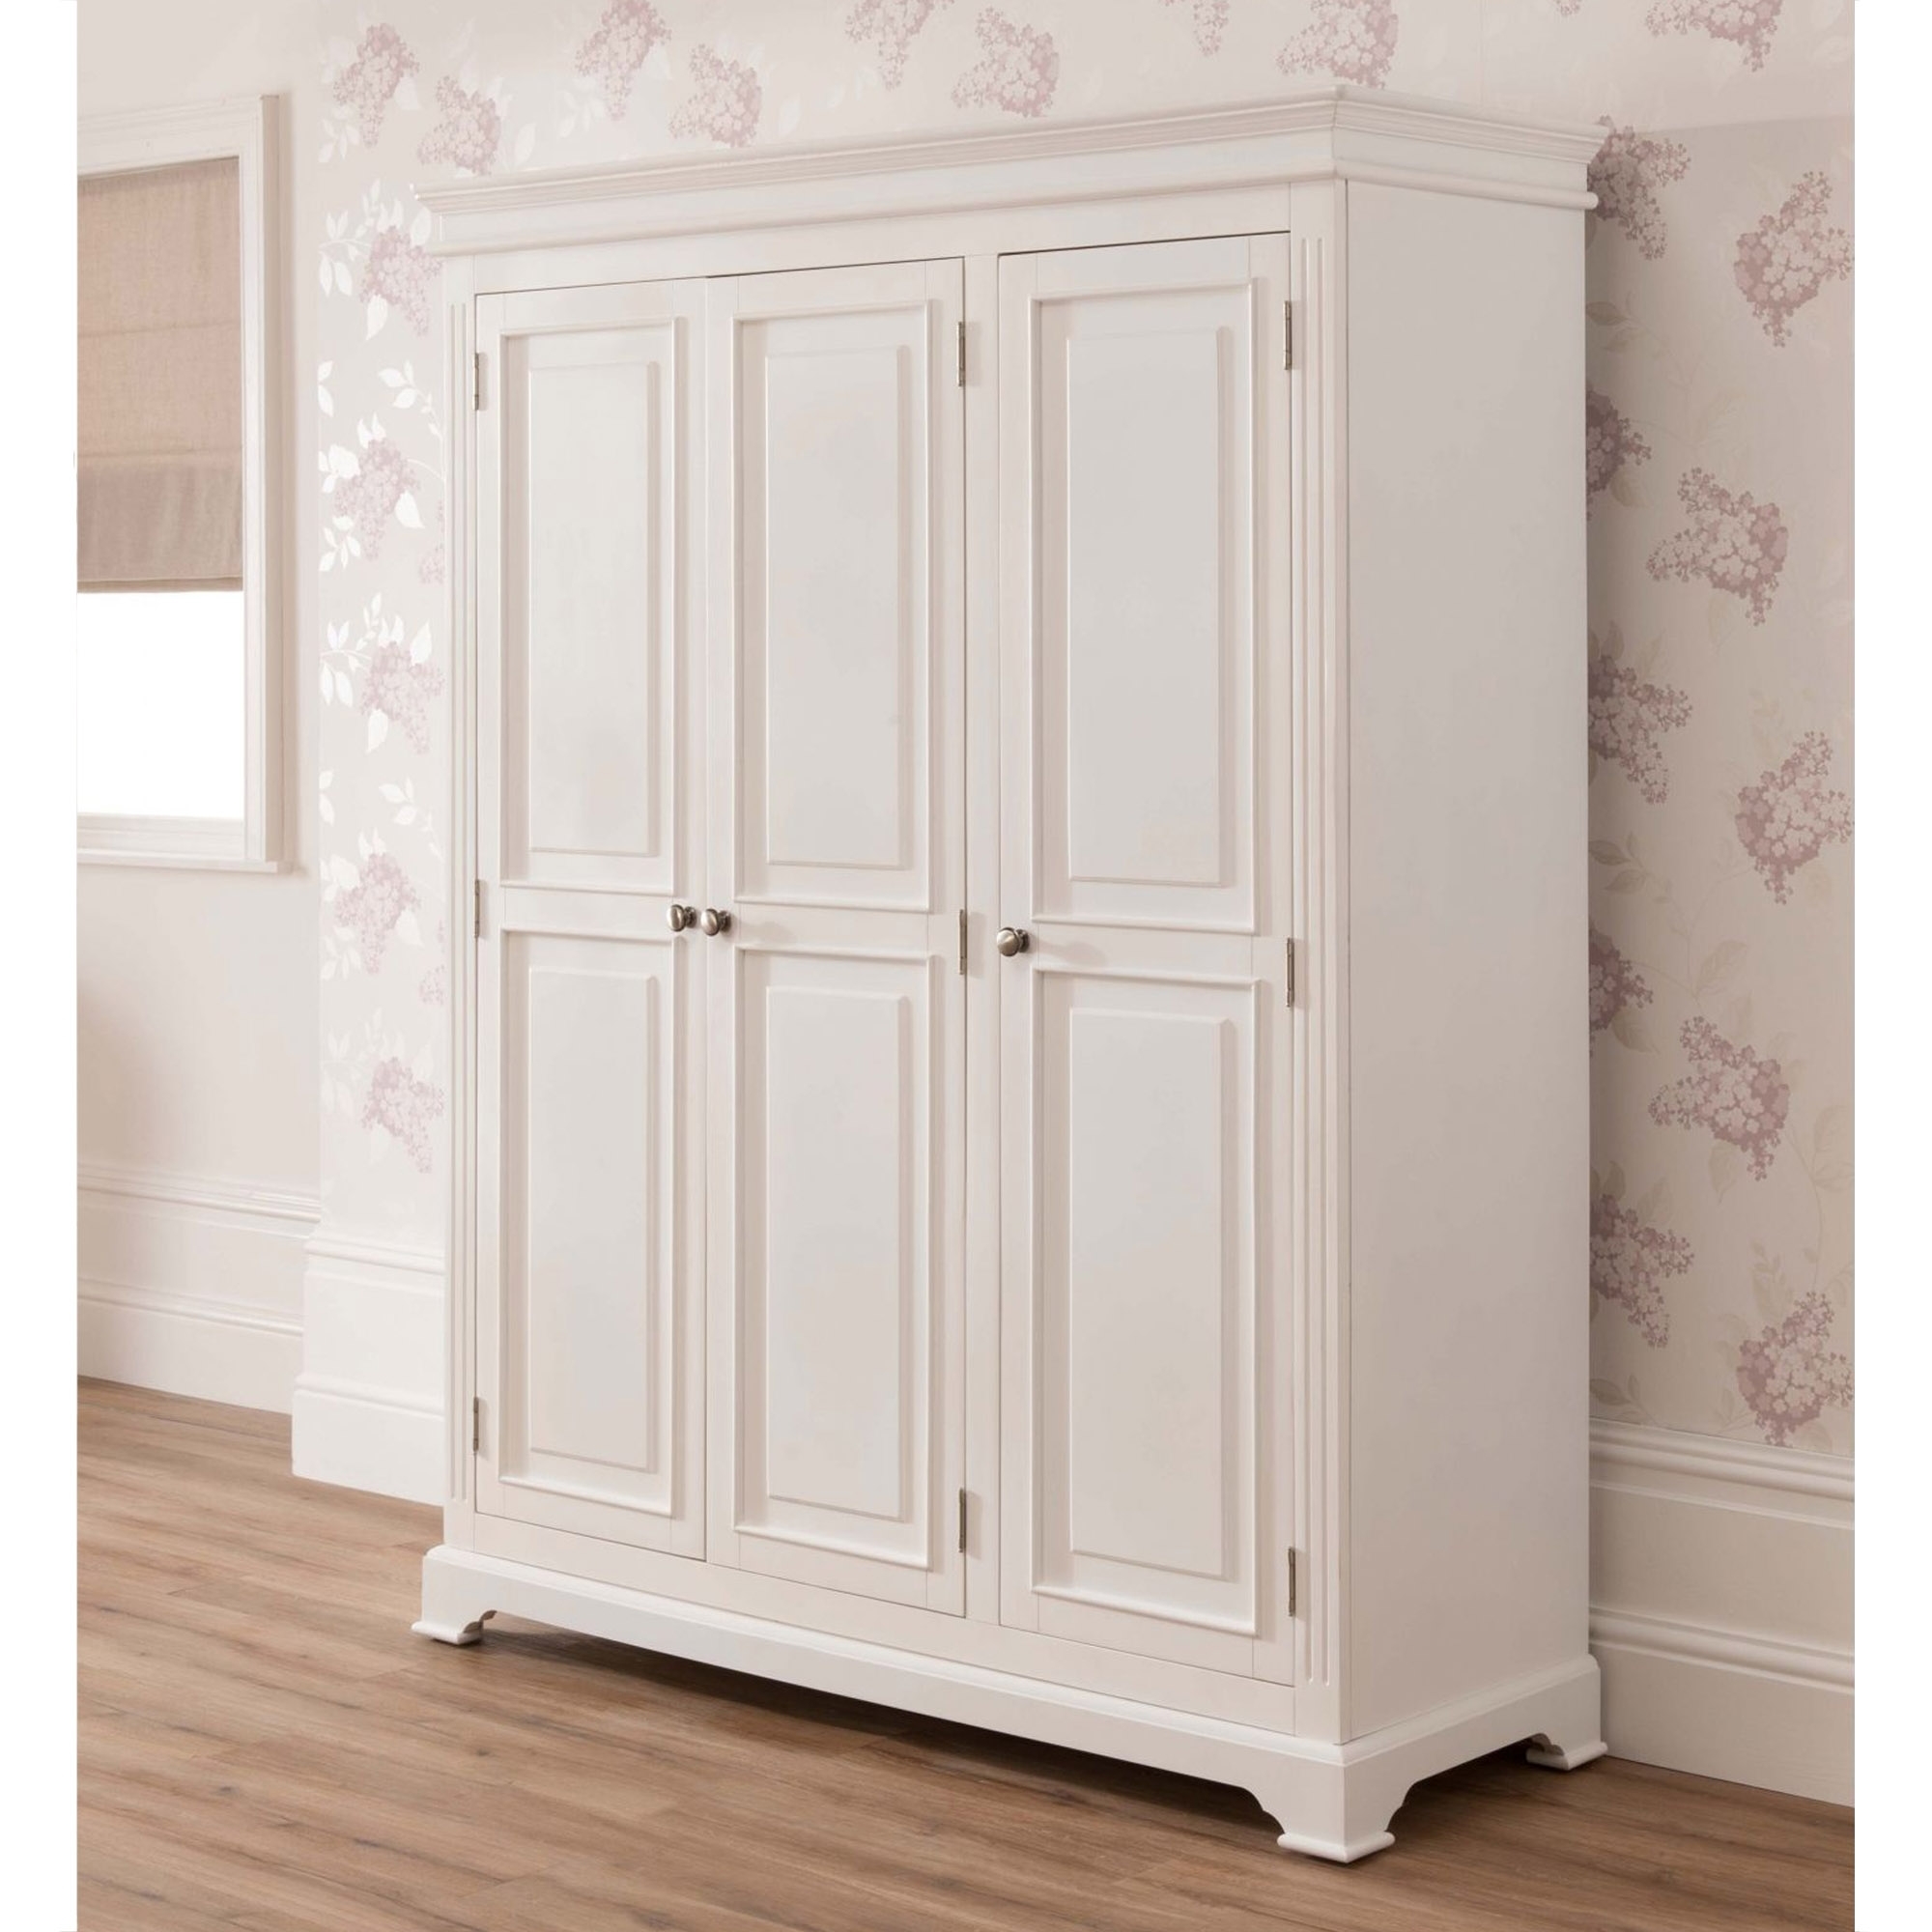 Shabby Chic Wardrobe for Your New Modern Lifestyle